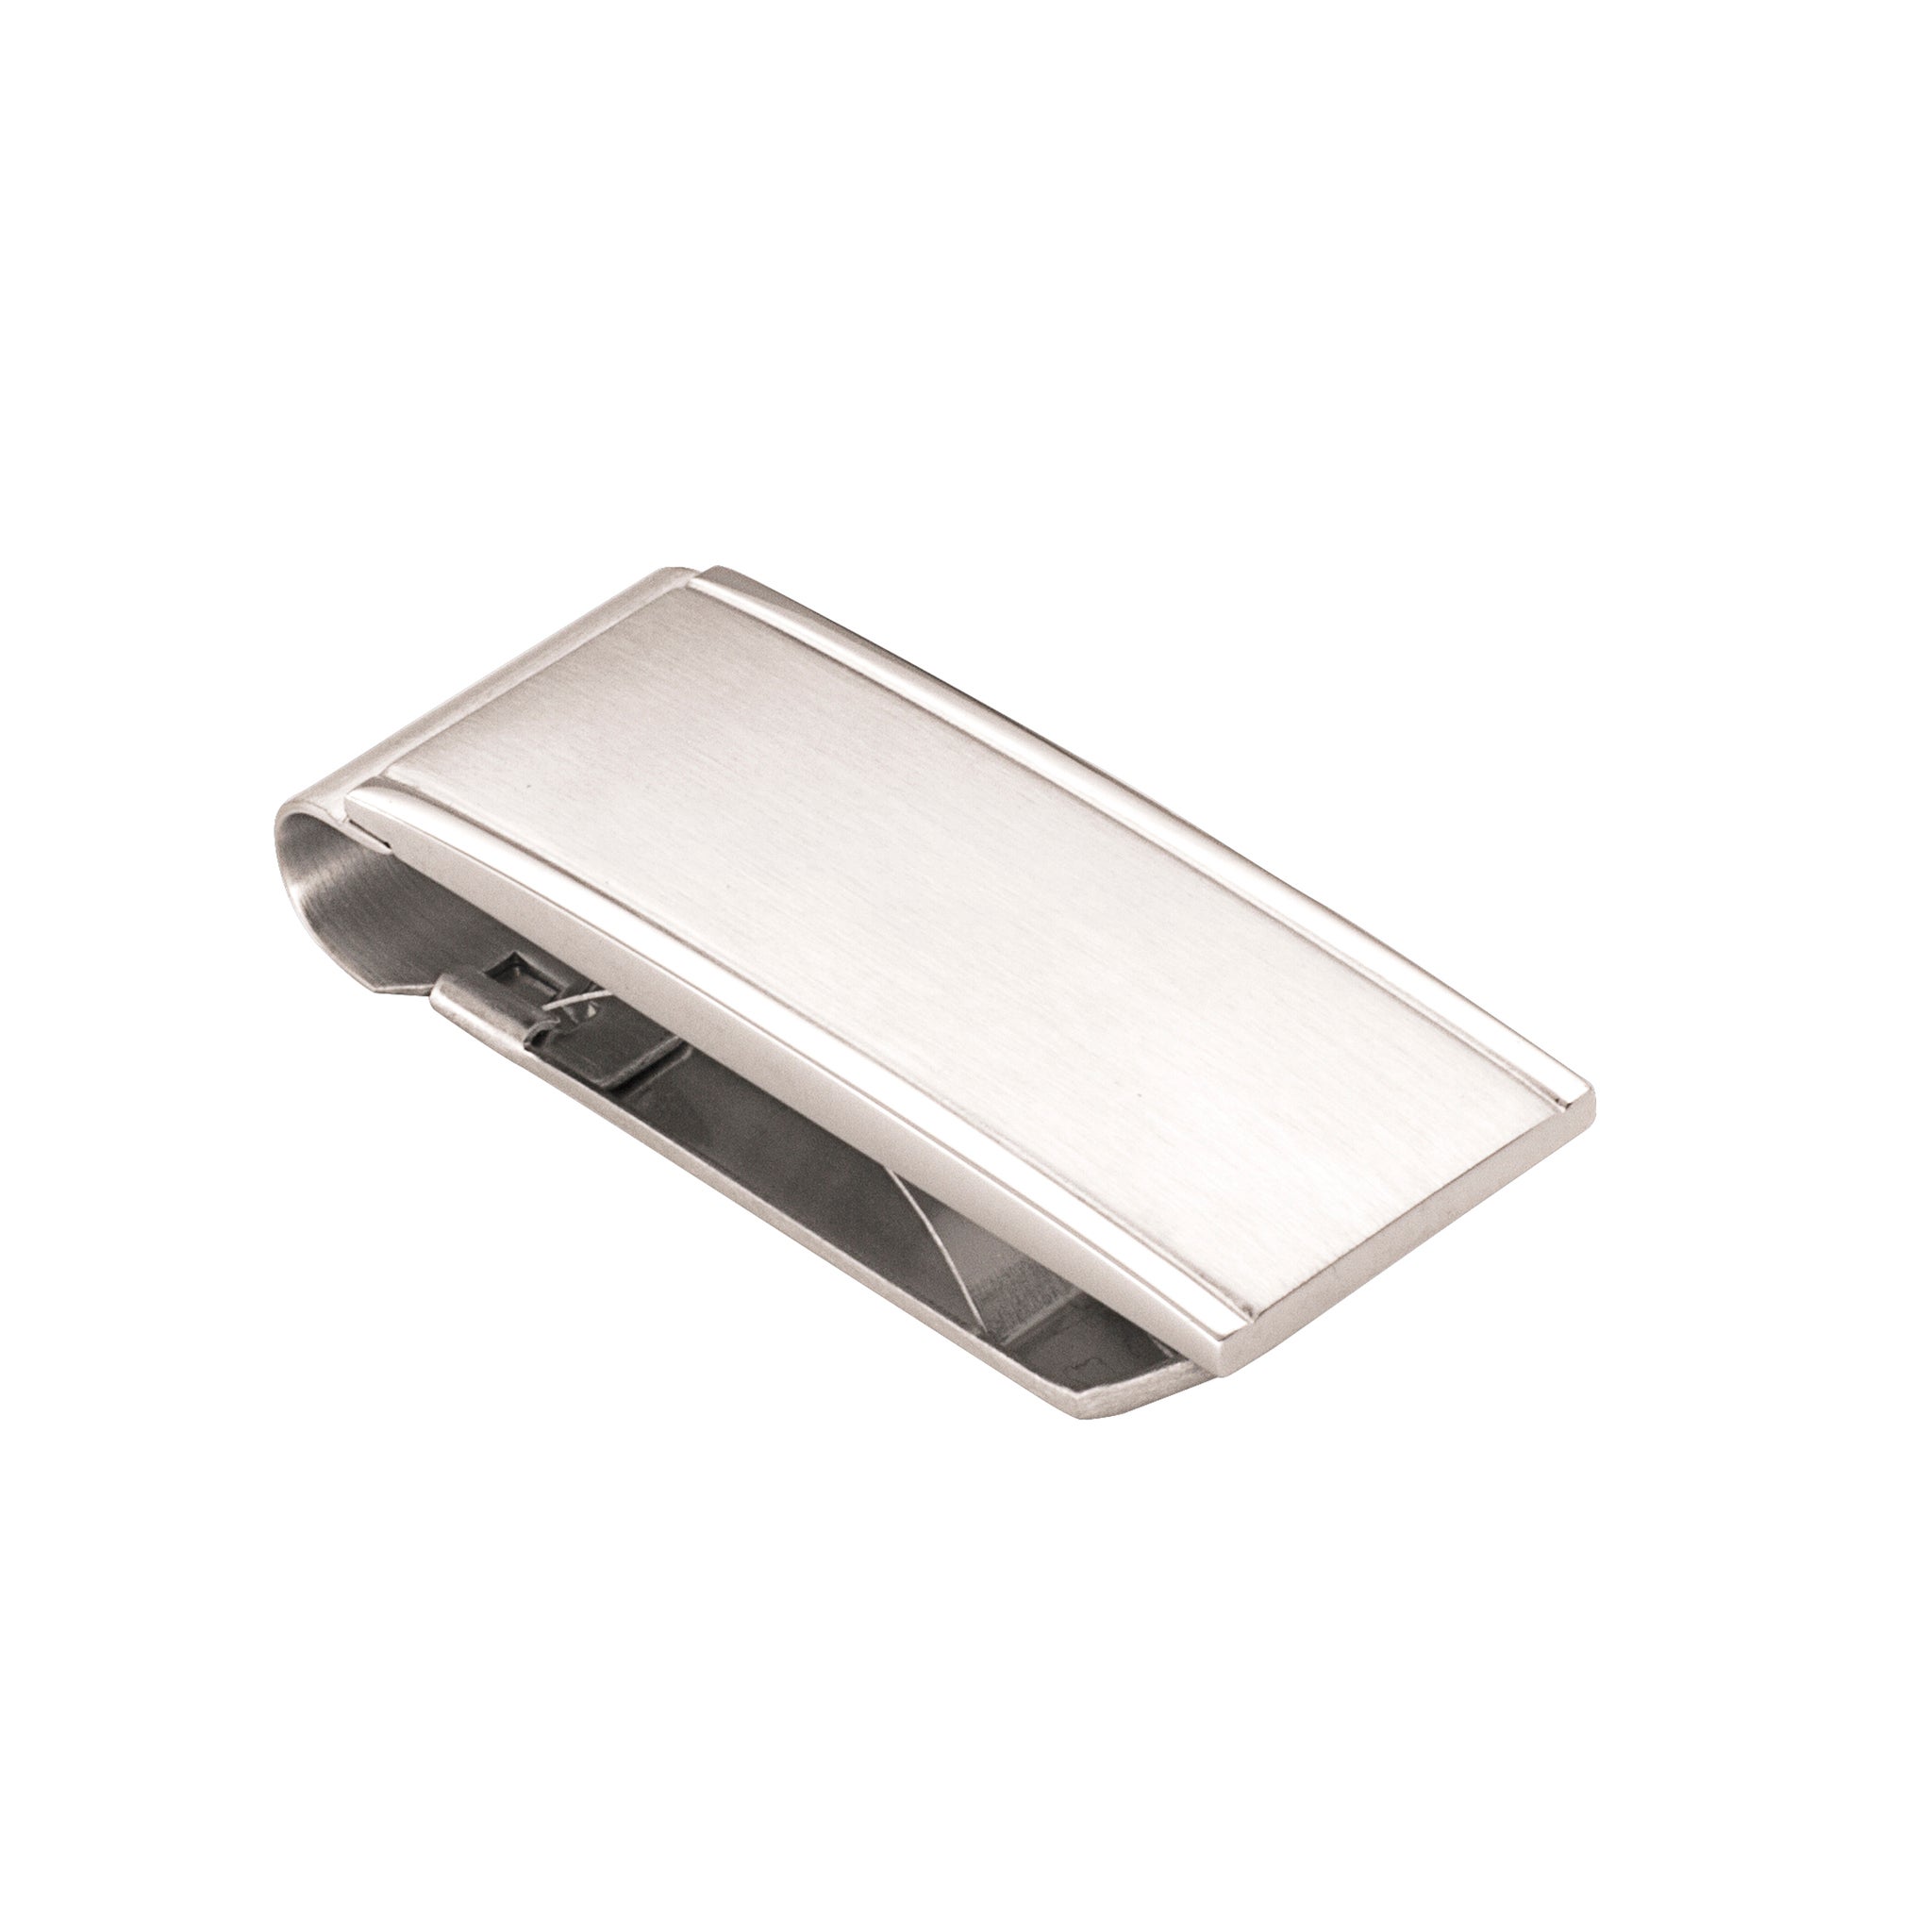 Money Clips - Stainless